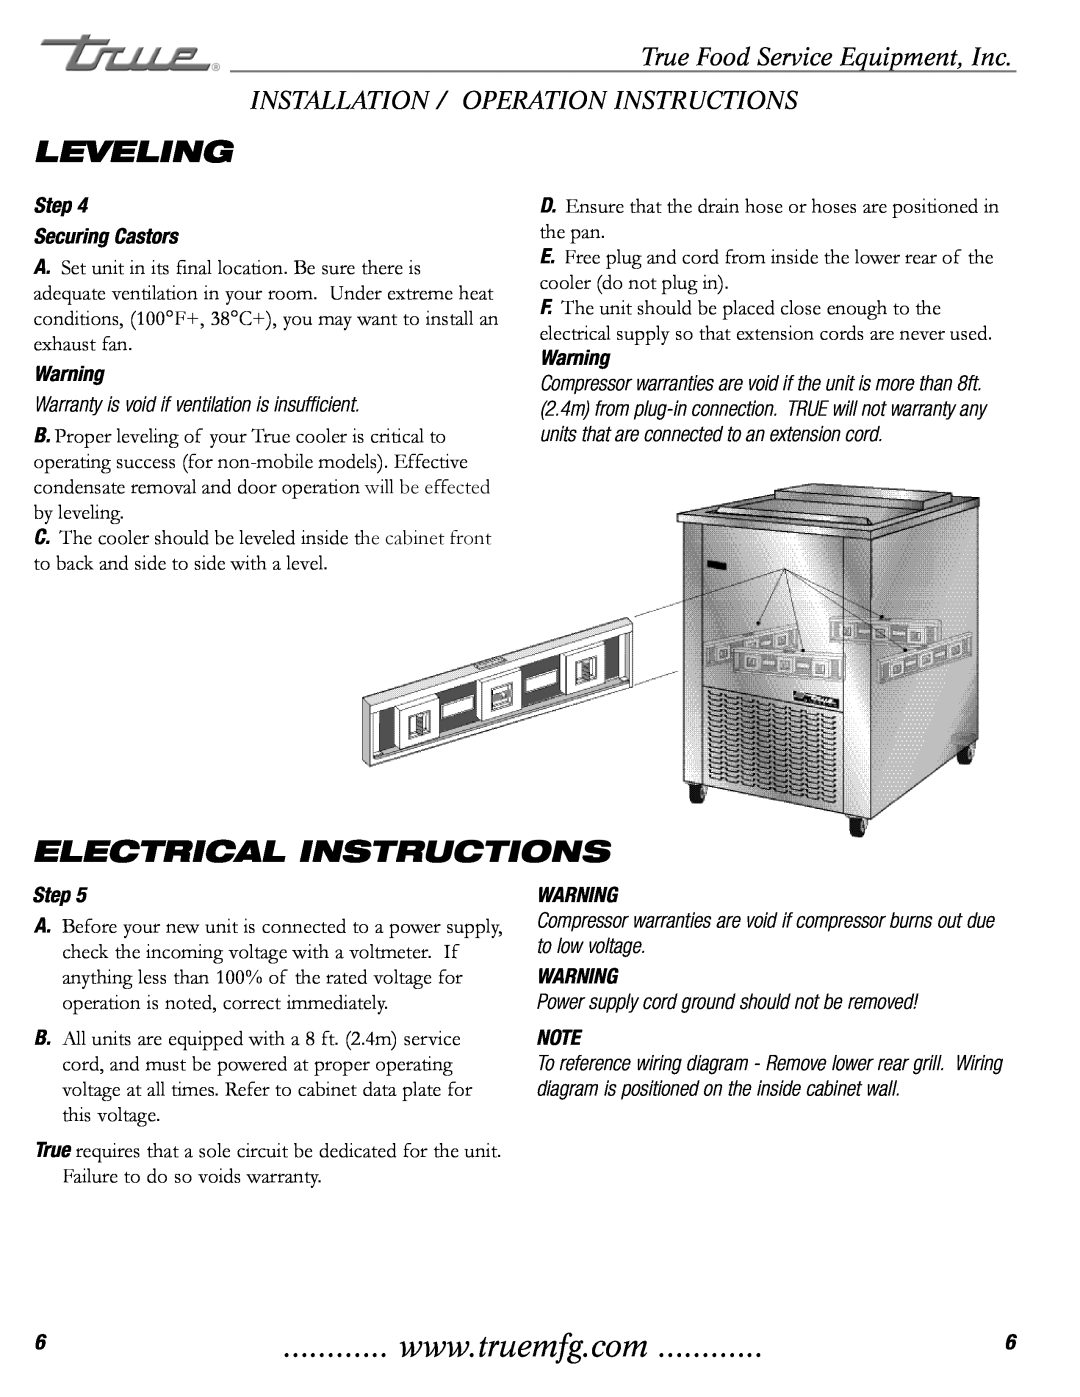 True Manufacturing Company TMW-36F Leveling, Electrical Instructions, Warranty is void if ventilation is insufficient 